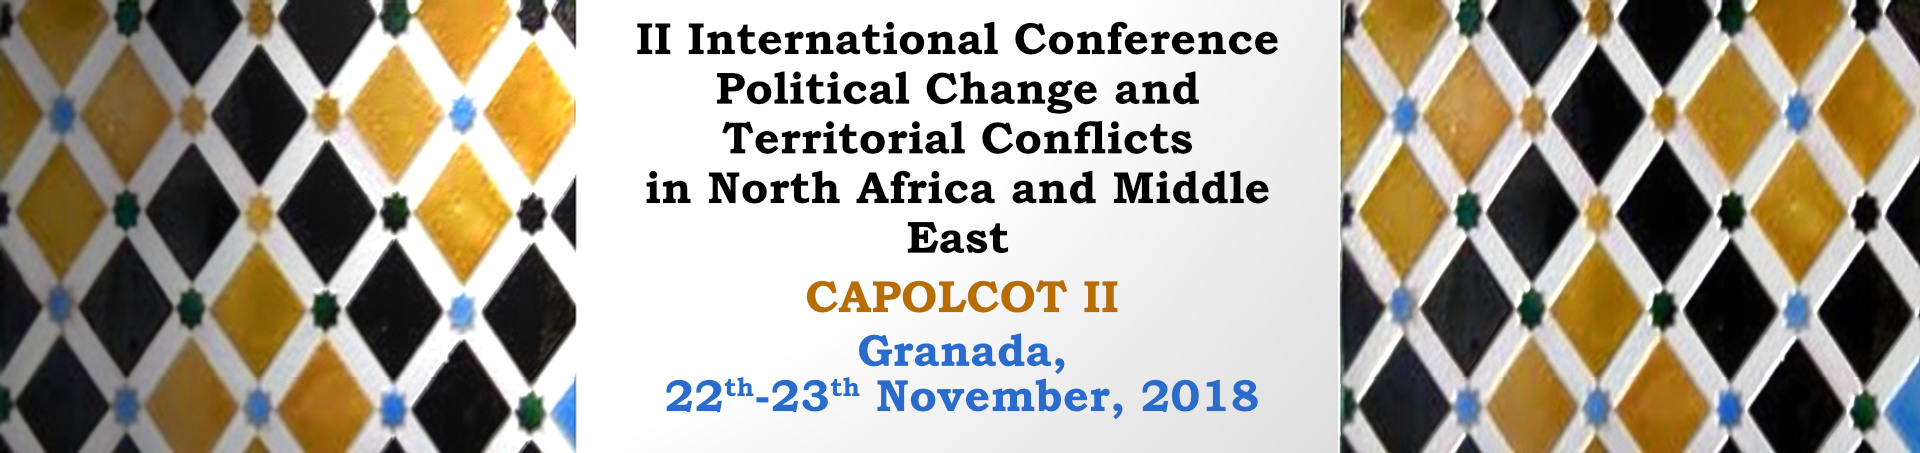 Flyer CAPOLCOT II Conference